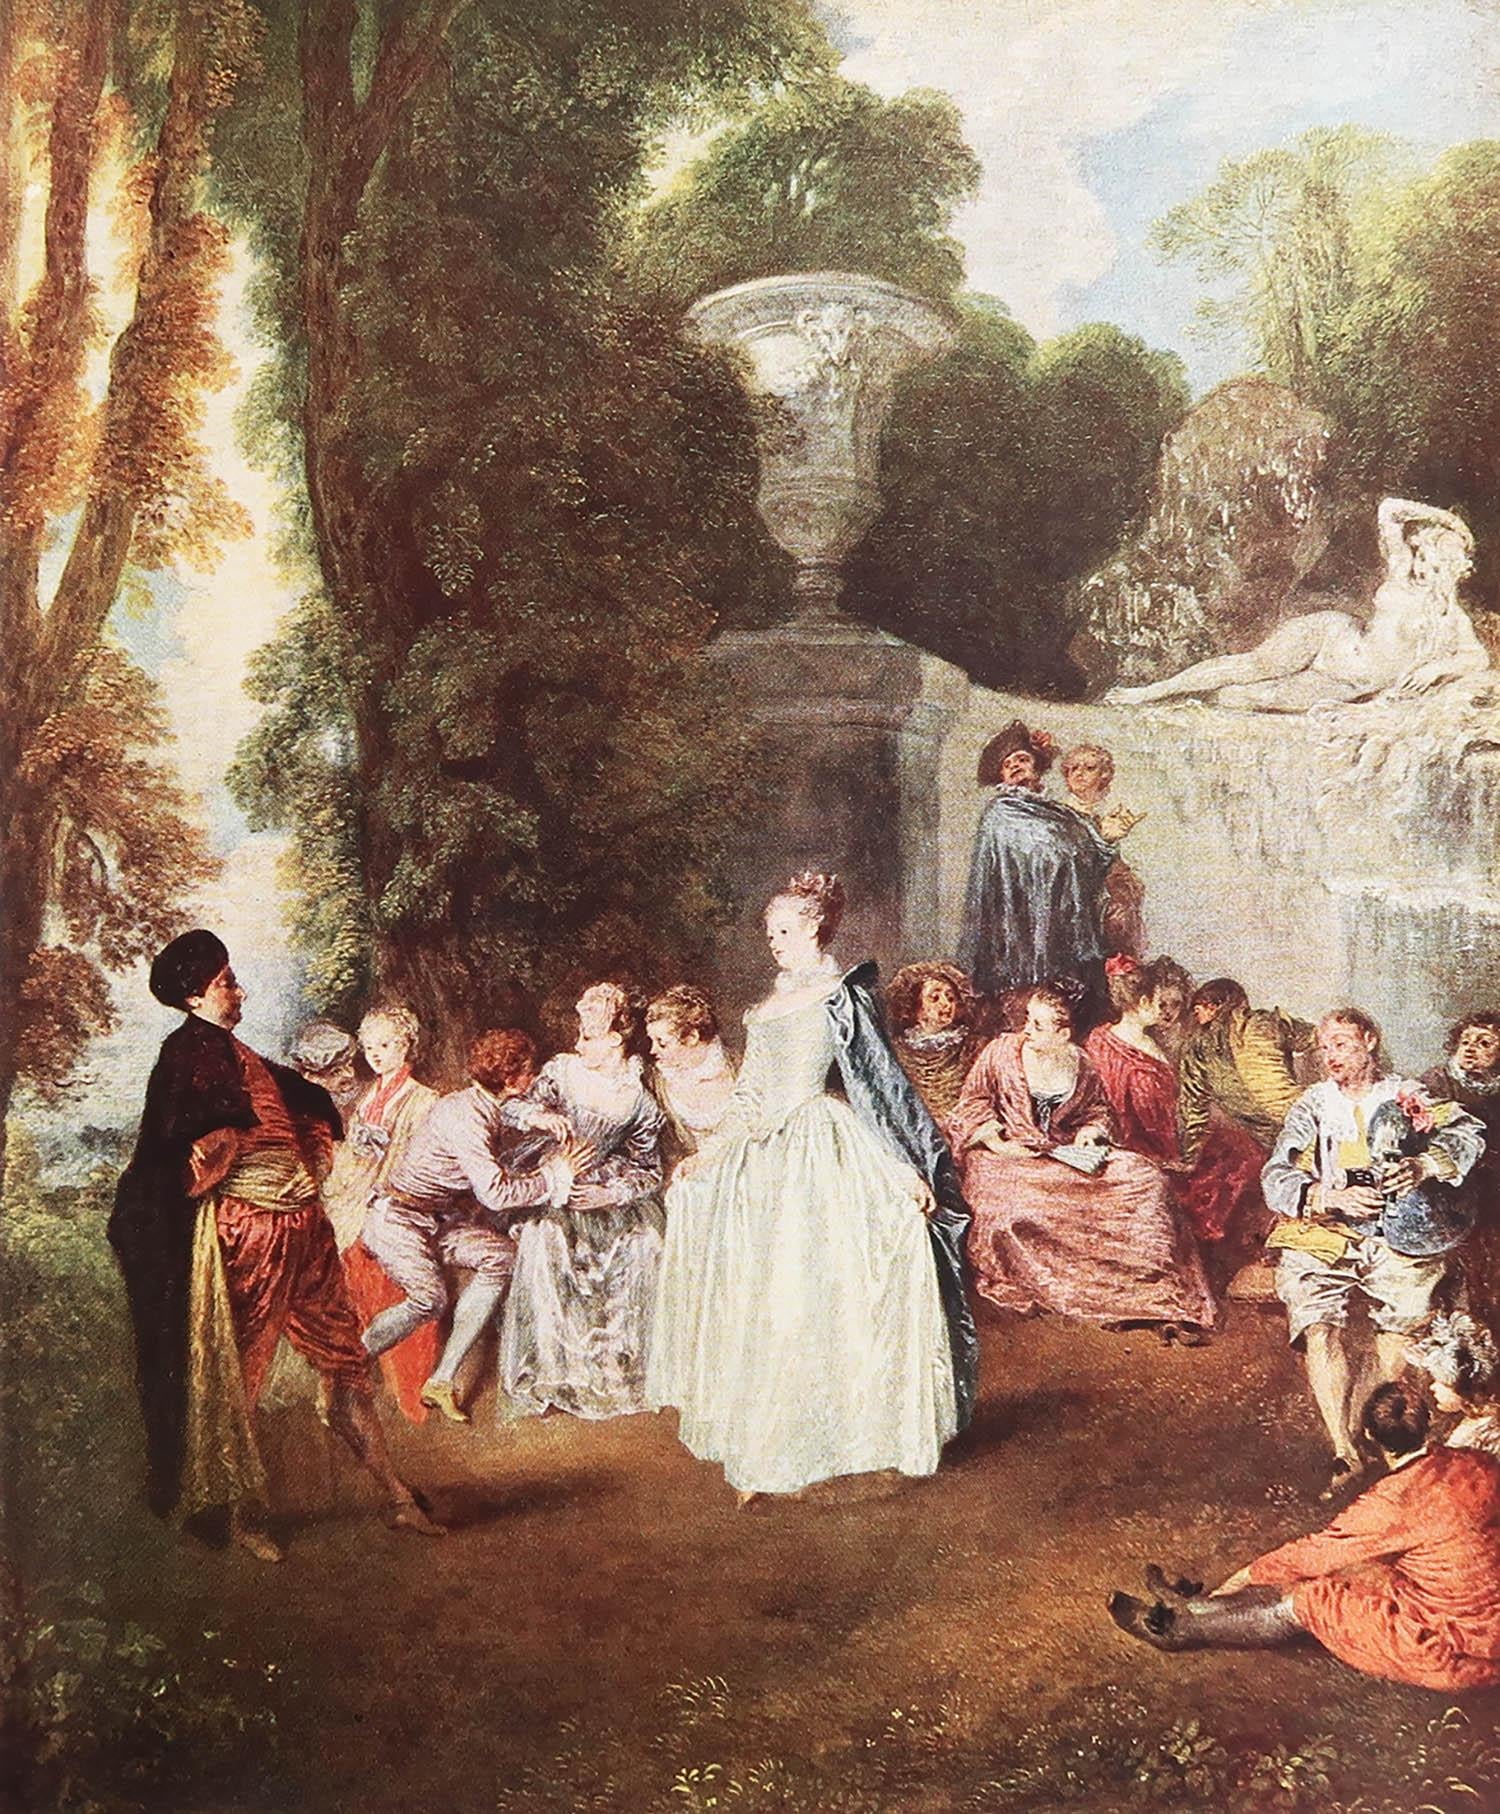 Wonderful print after Watteau

Lovely colors.

Tipped in plate on good quality paper

Chromolithograph 

Published circa 1920

The measurement given below is the white paper size, not the actual image.

Unframed.

